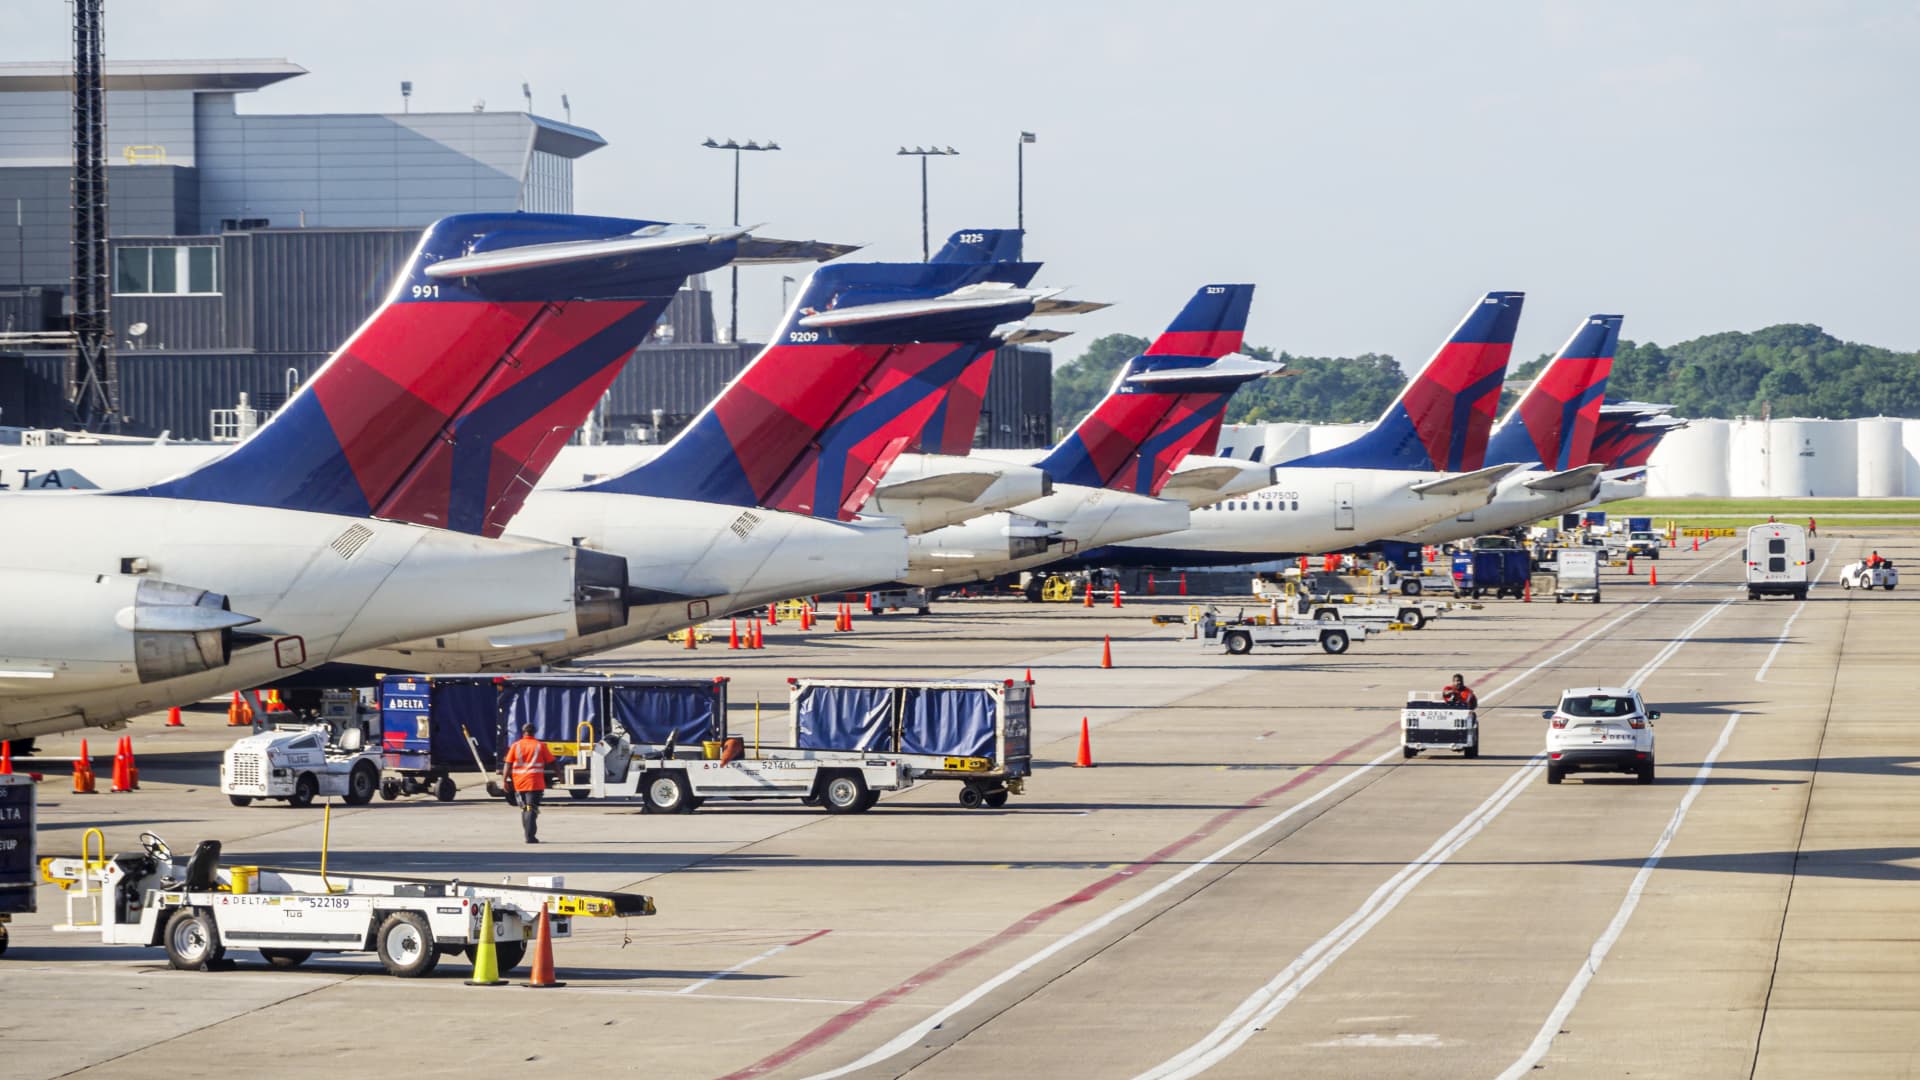 Delta is setting up emergency savings for workers of up to $1,000